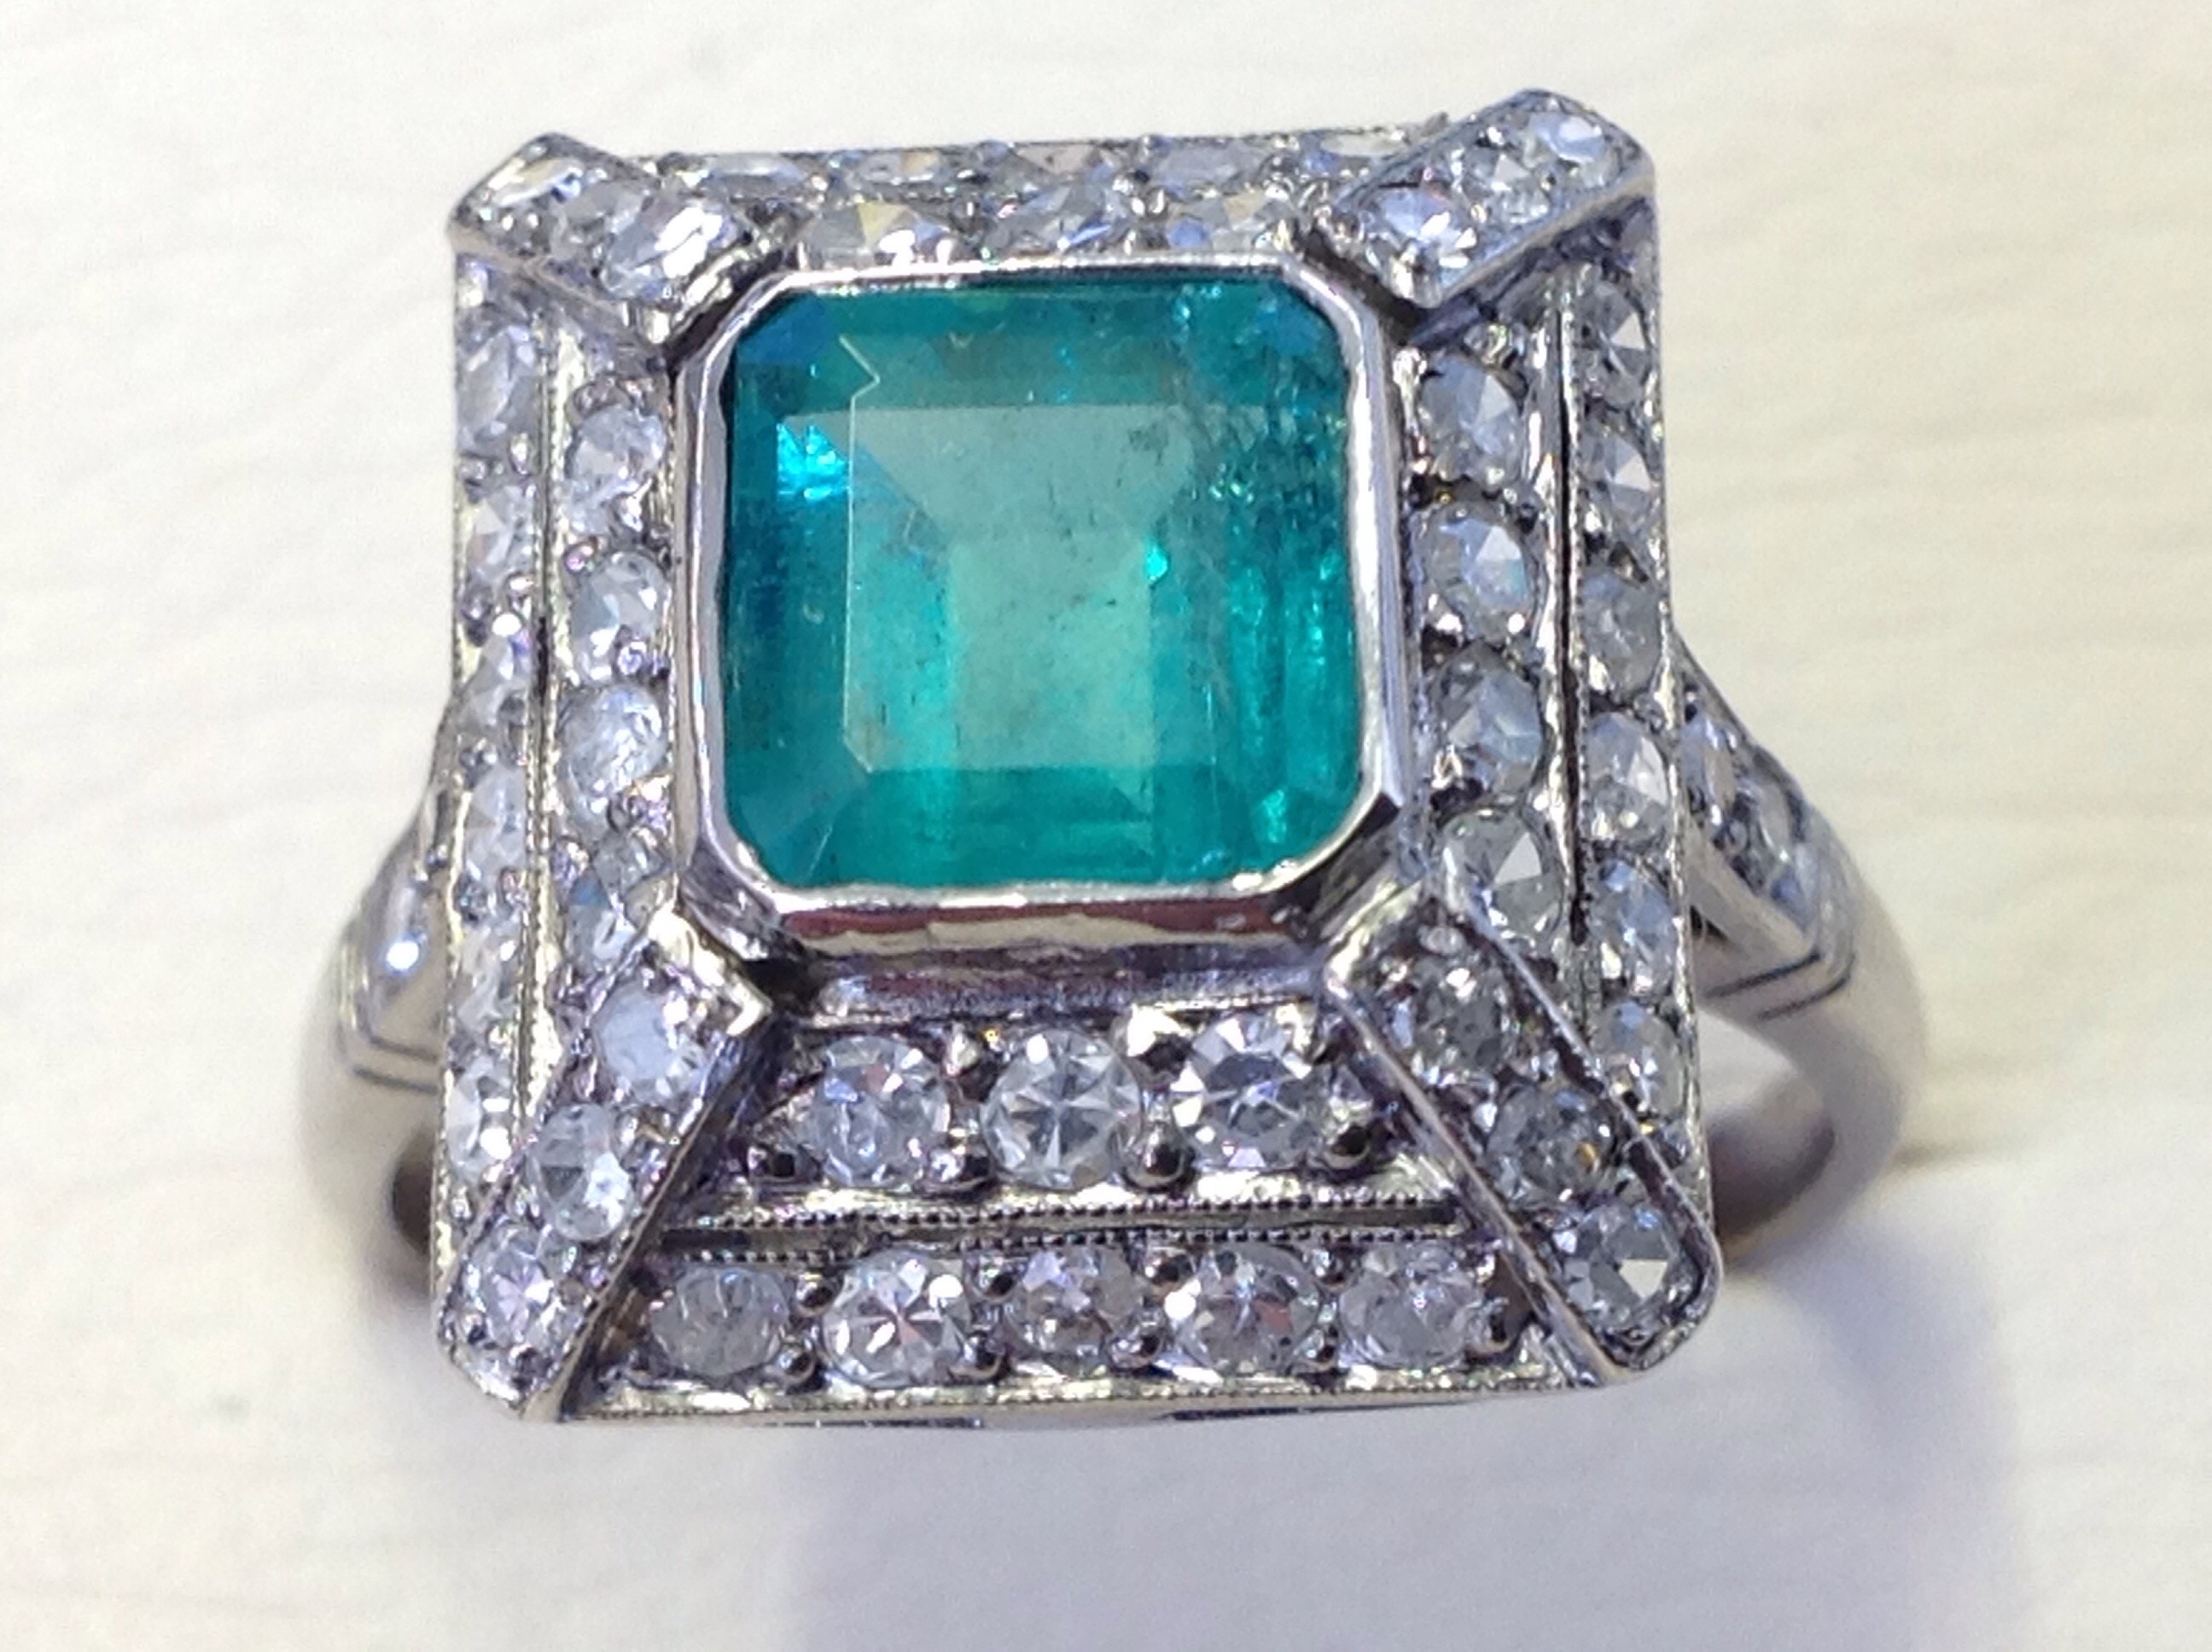 A square emerald & diamond pyramid shaped ring, the Columbian emerald of over 1.5 carats, framed